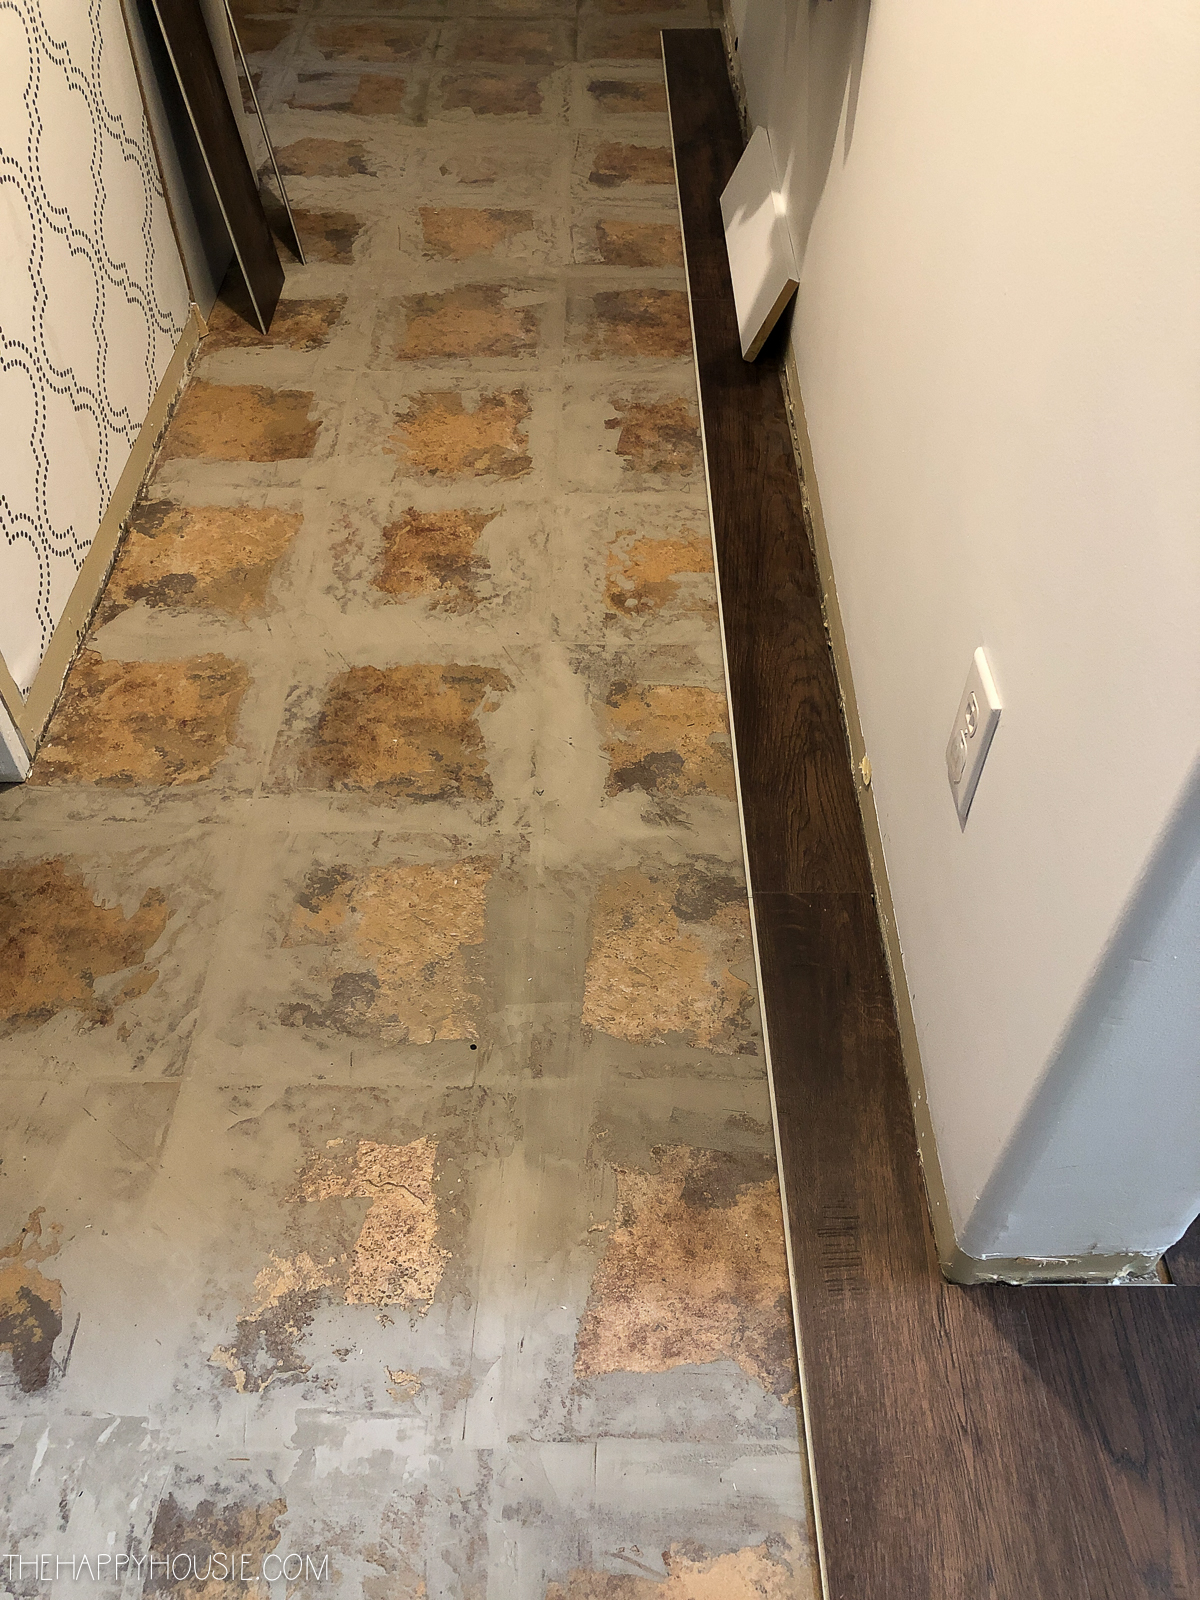 To Install Vinyl Plank Over Tile Floors, What Flooring Can You Lay Over Ceramic Tile